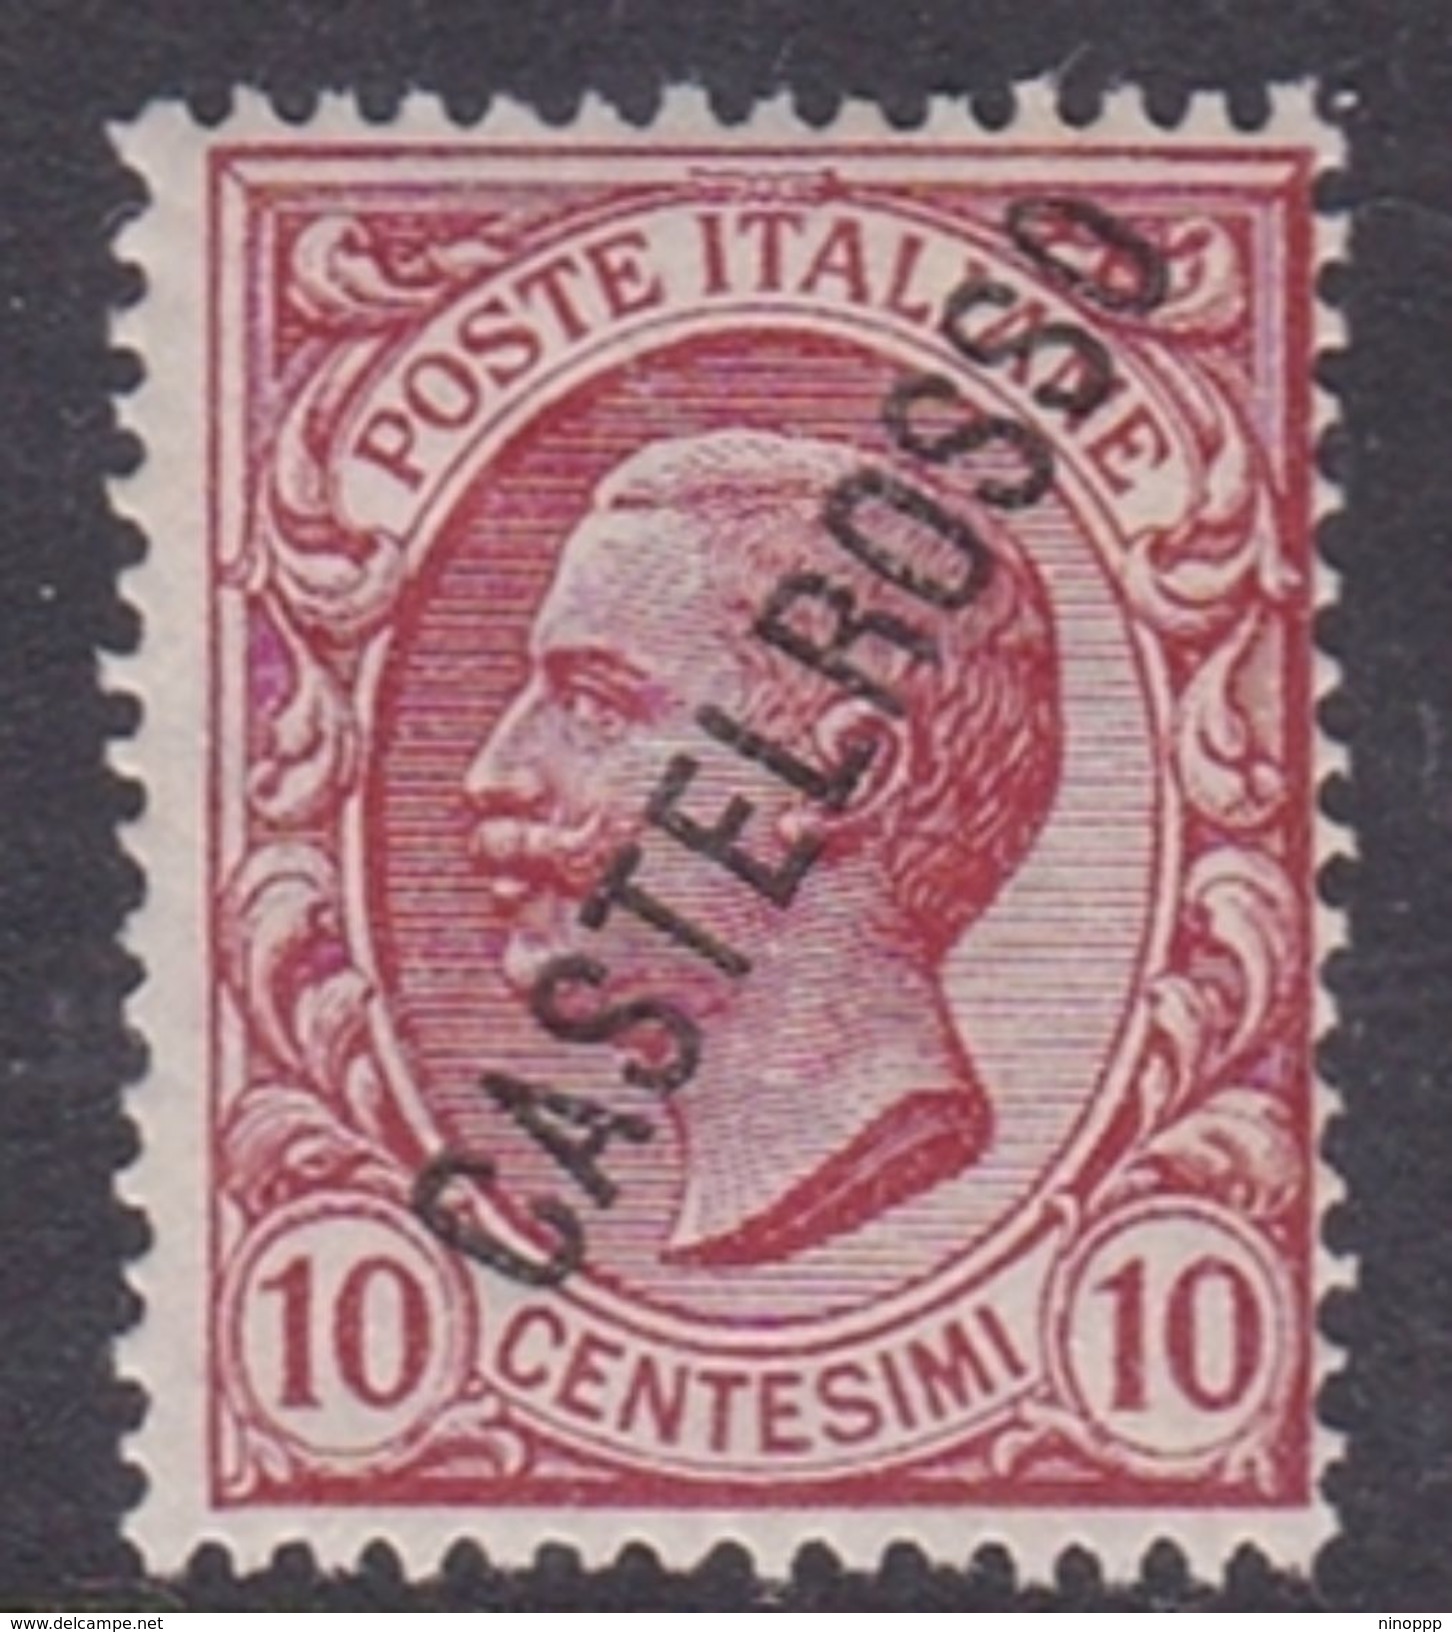 Italy-Colonies And Territories-Castelrosso S16 1924 10c Rose MNH - General Issues